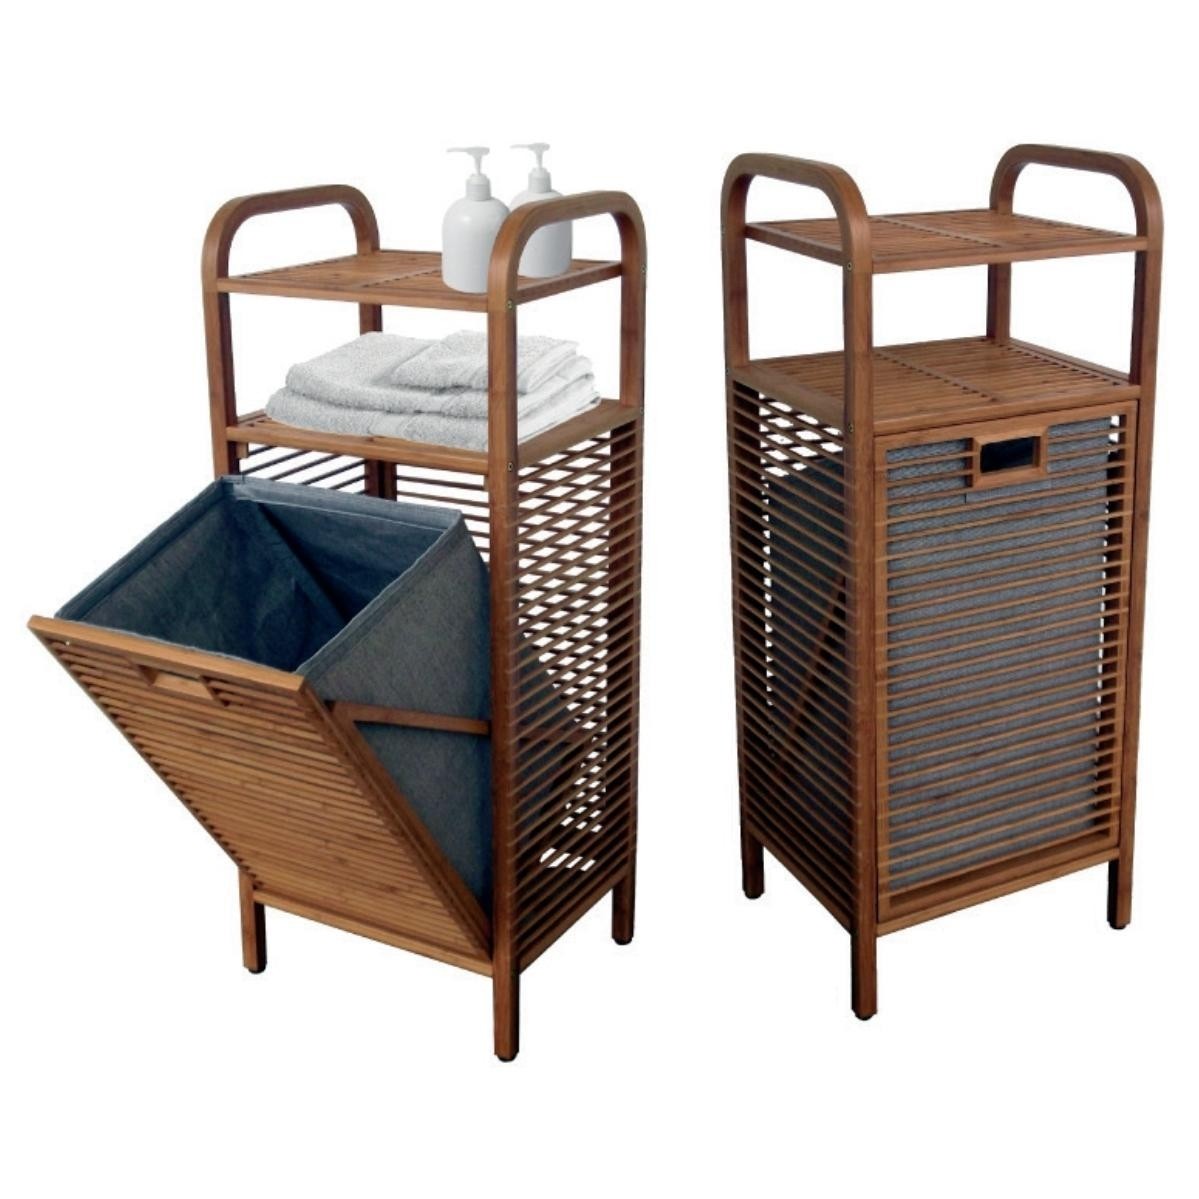 Laundry basket with 2 shelves with bamboo body 40 95